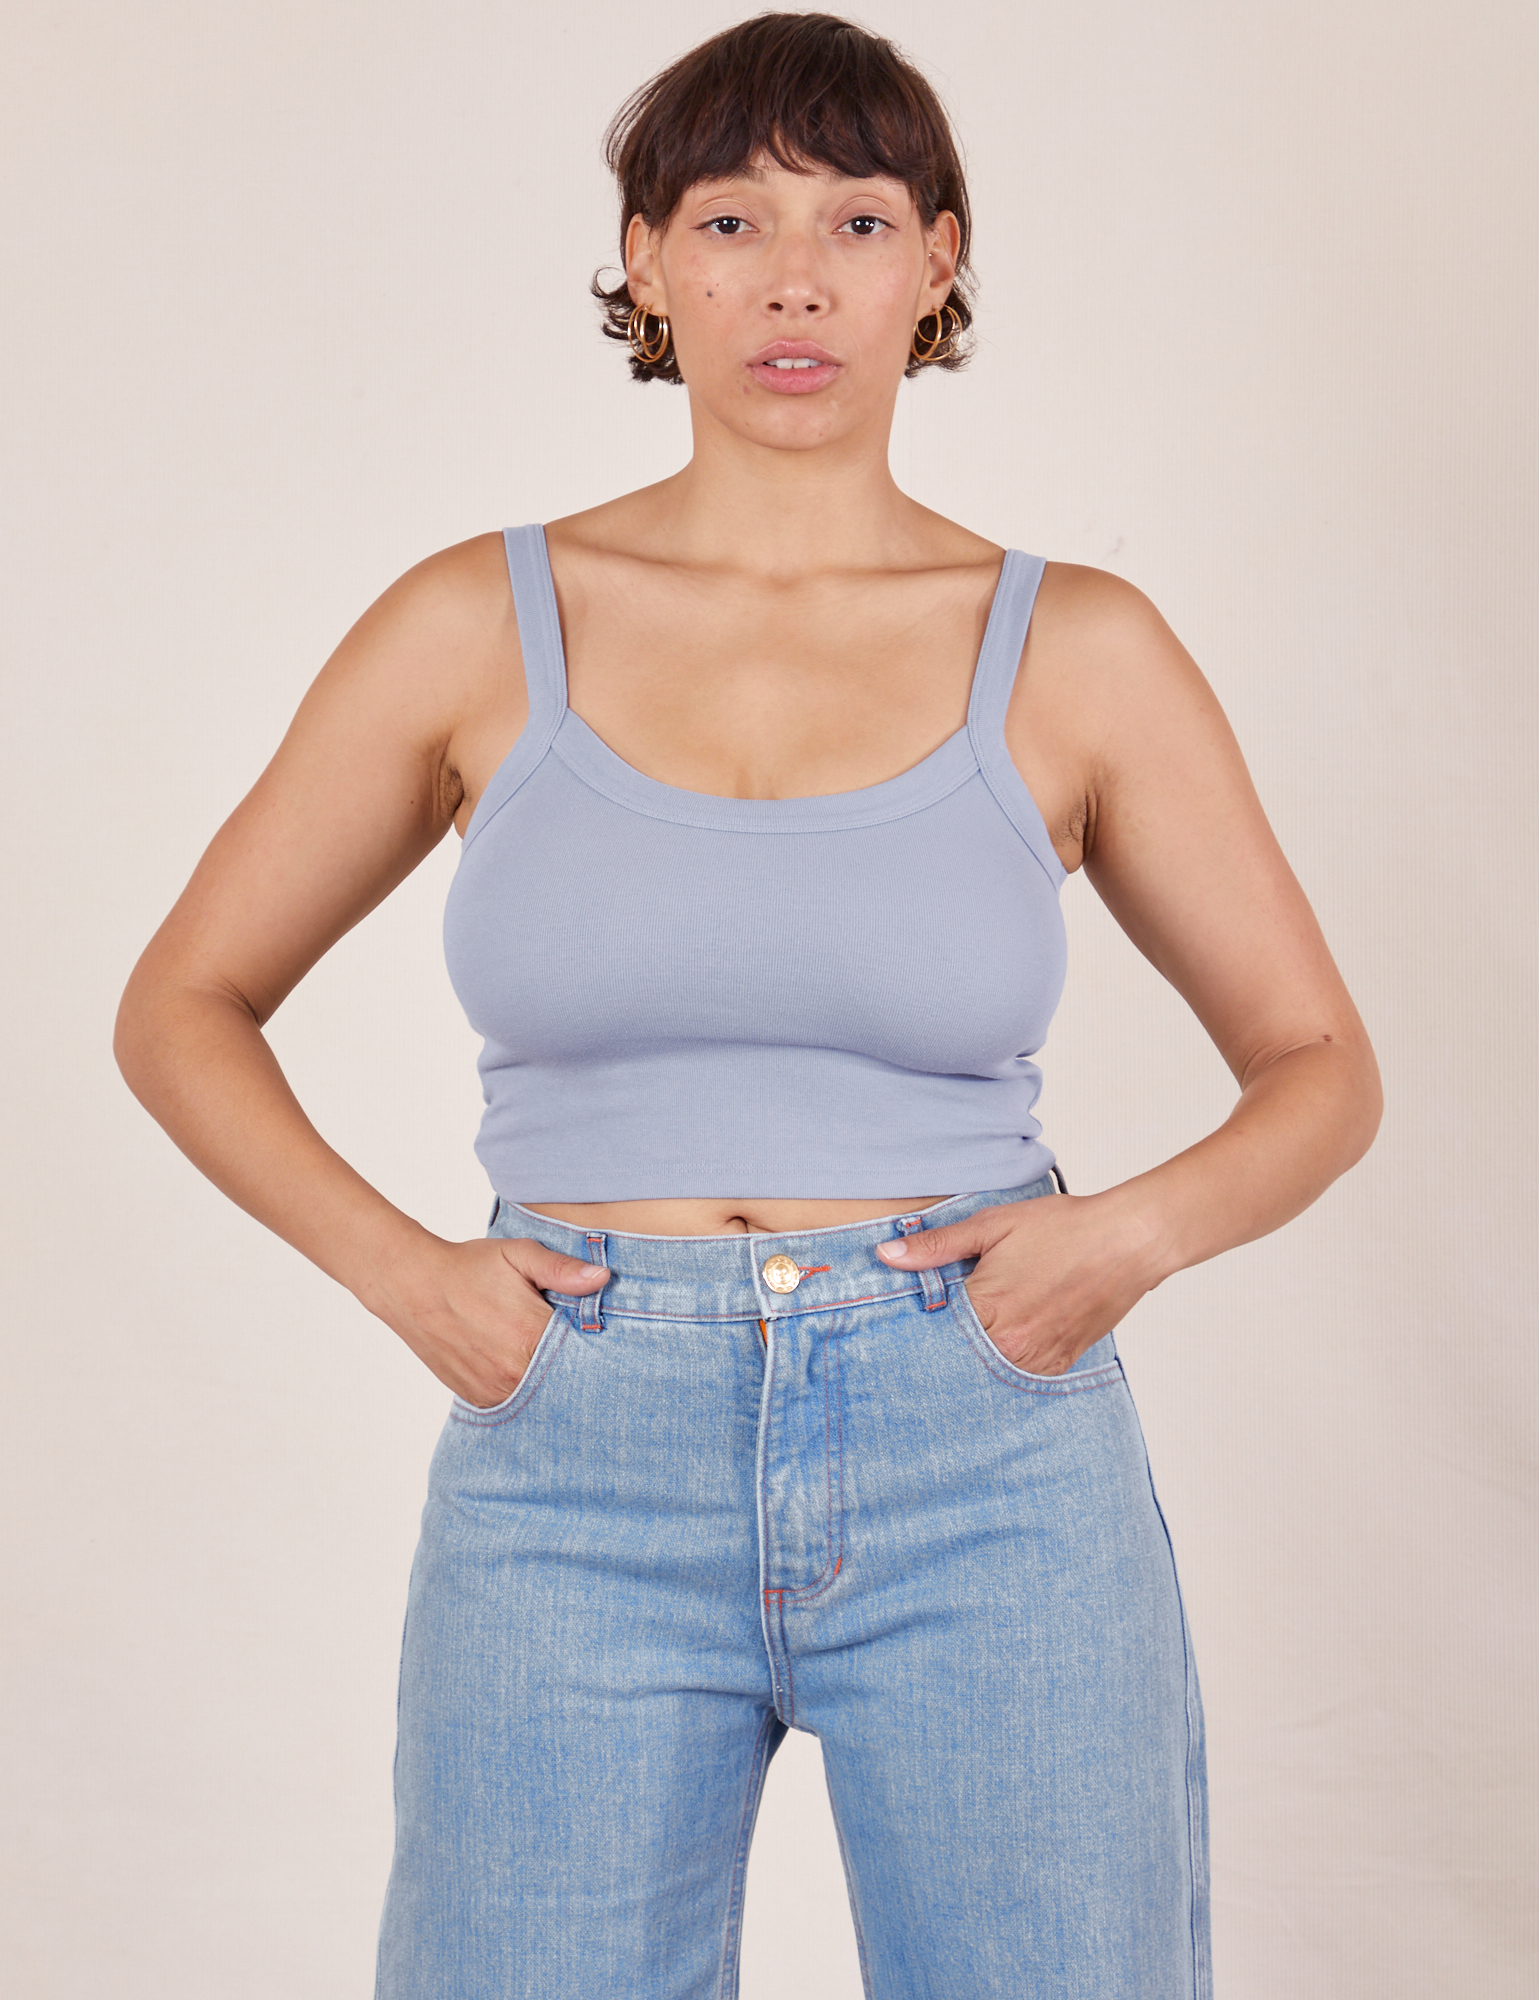 Tiara is 5&#39;4&quot; and wearing XS Cropped Cami in Periwinkle paired with light wash Sailor Jeans